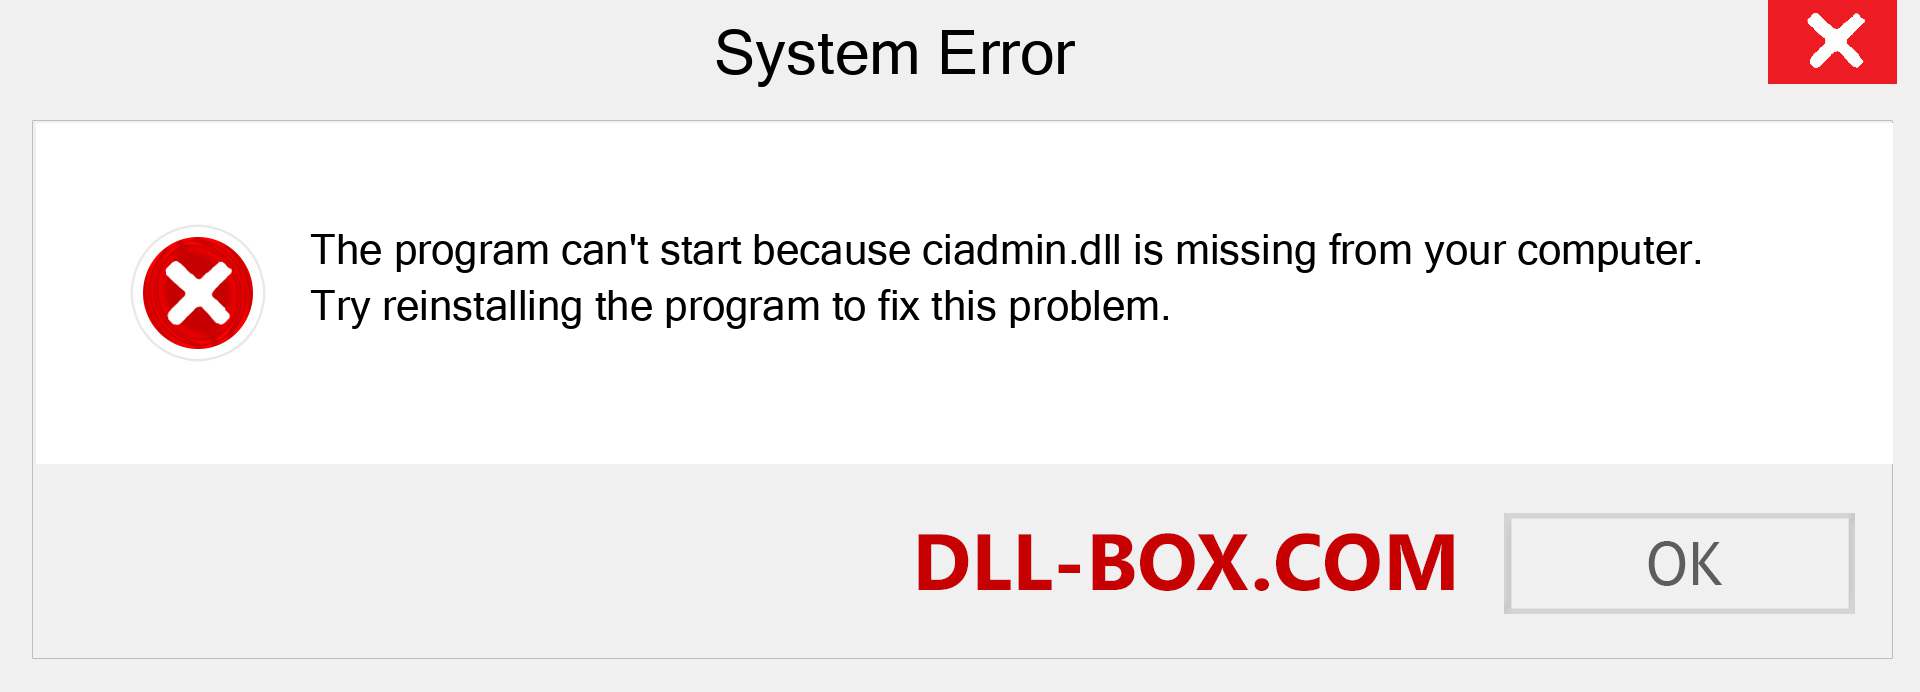  ciadmin.dll file is missing?. Download for Windows 7, 8, 10 - Fix  ciadmin dll Missing Error on Windows, photos, images